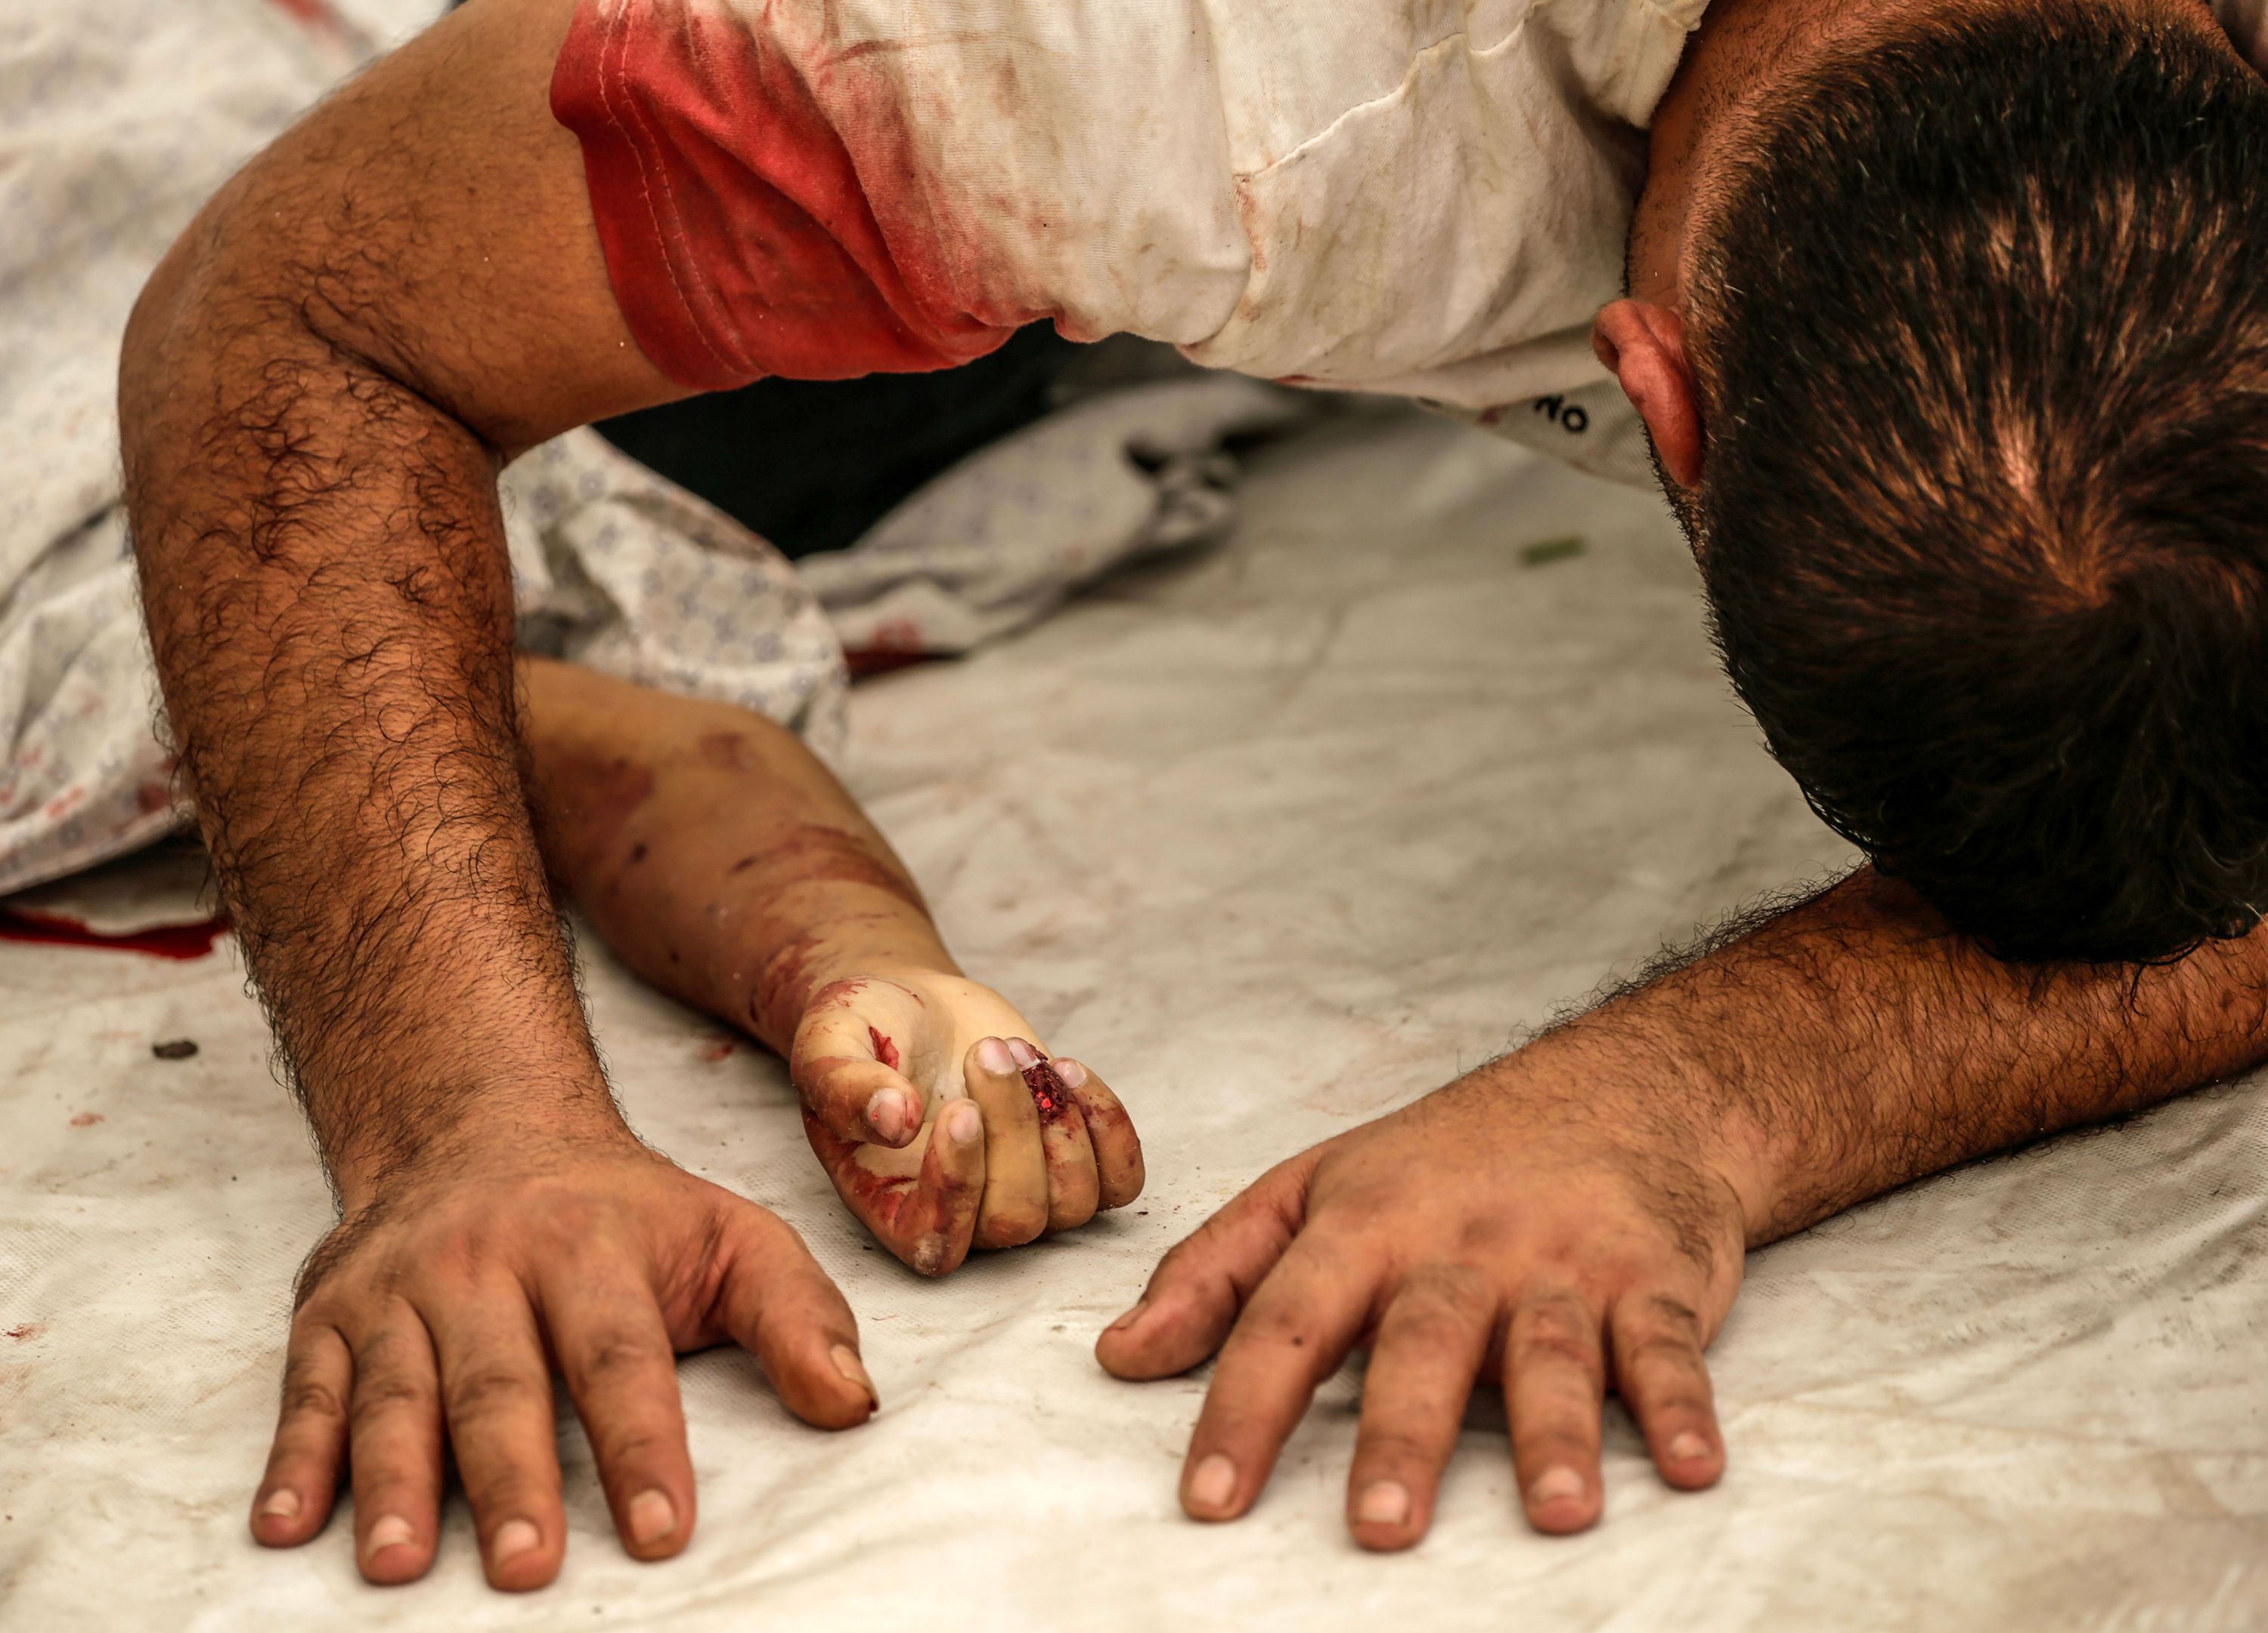 A Palestinian man mourns over the body of his nephew killed in an Israeli airstrike in Gaza City on October 9.